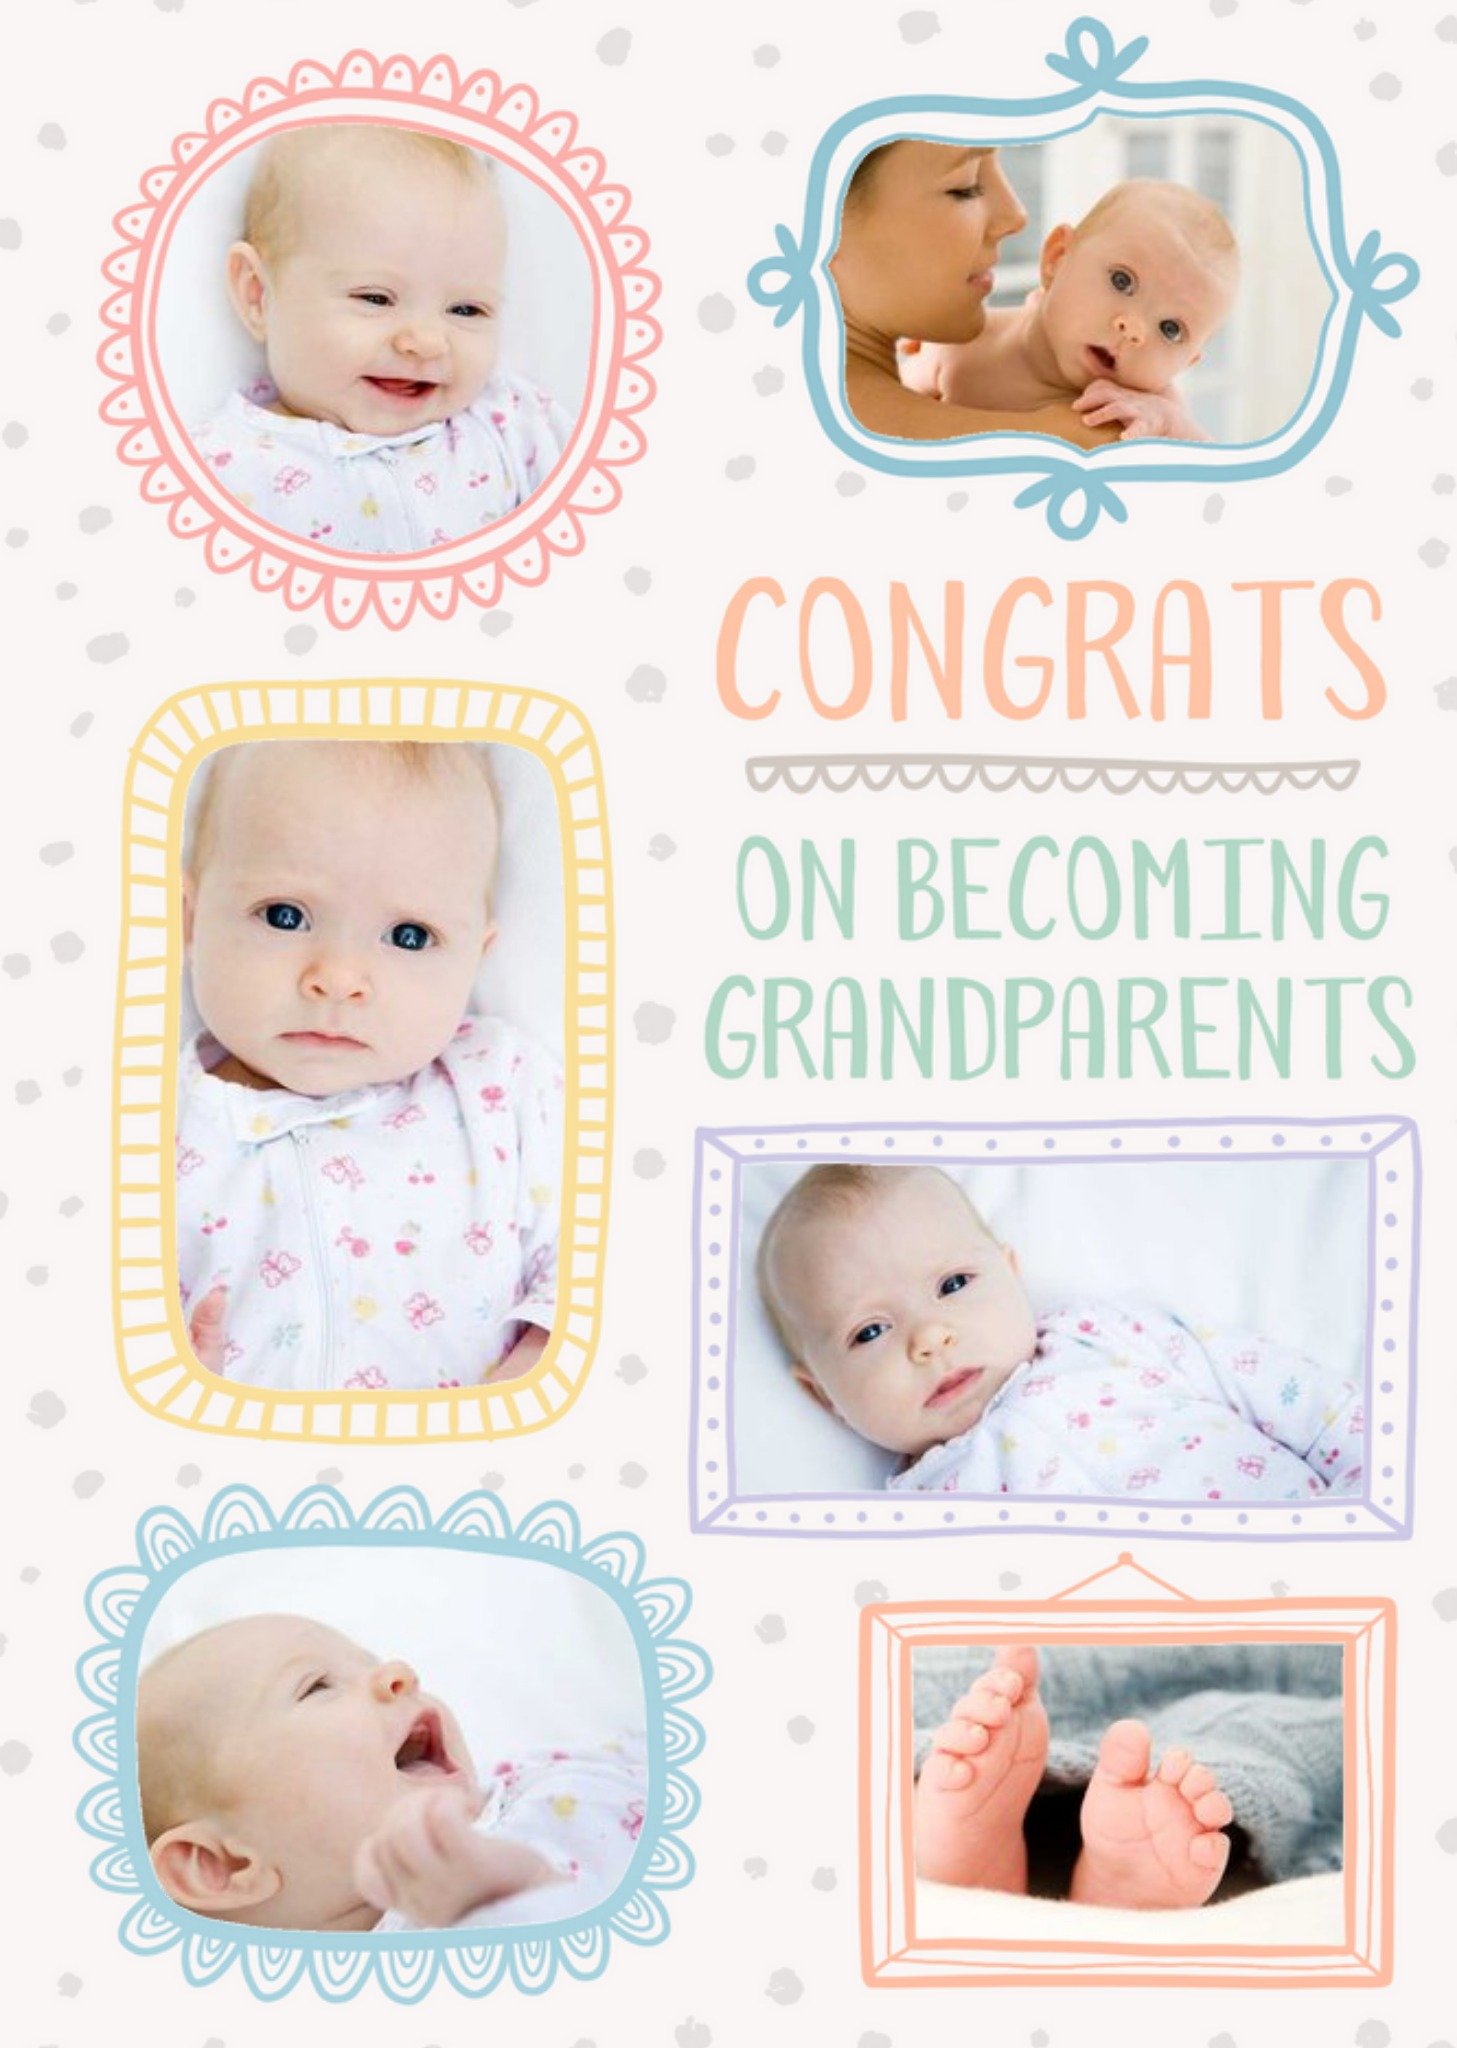 Moonpig Various Photo Frames On A White Speckly Background Grandparents Photo Upload New Baby Card E